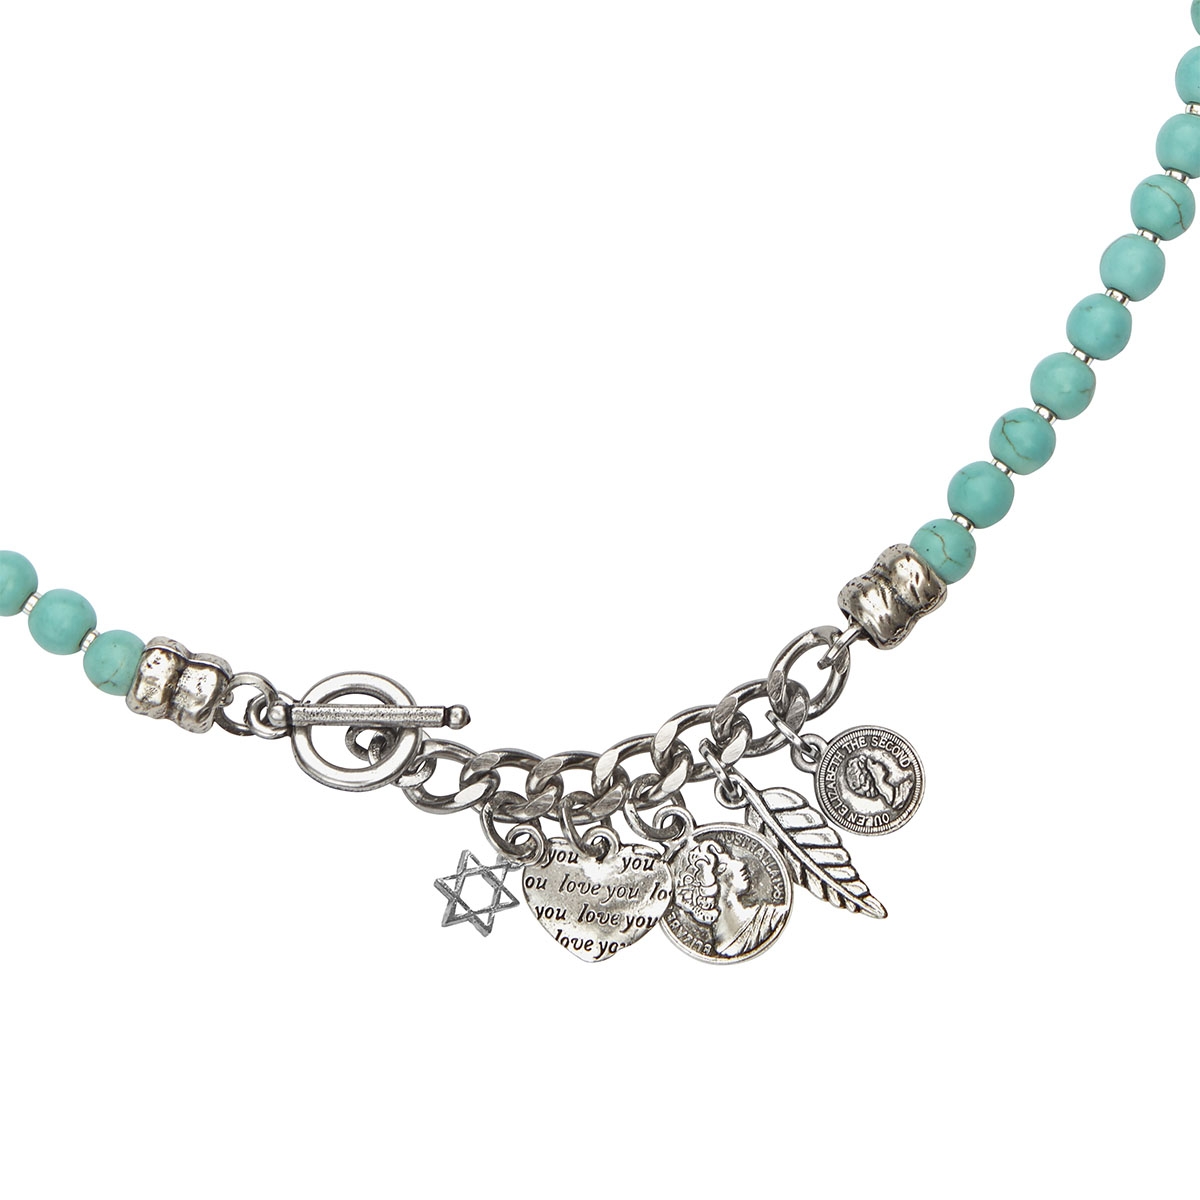 SEA Smadar Eliasaf Turquoise and Silver Elements Necklace - 1